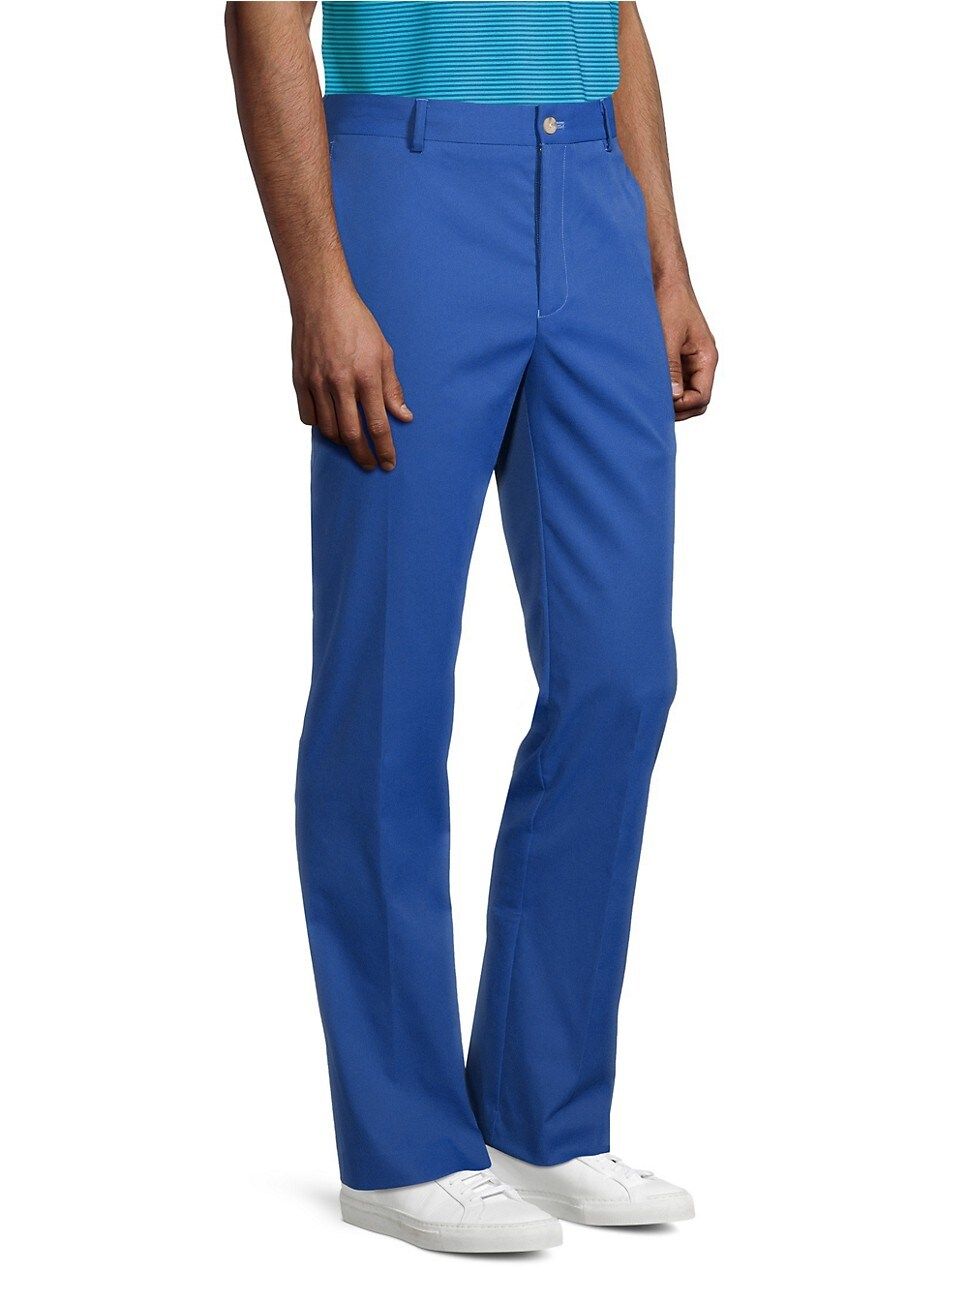 Crown Sport Raleigh Performance Trousers | Saks Fifth Avenue